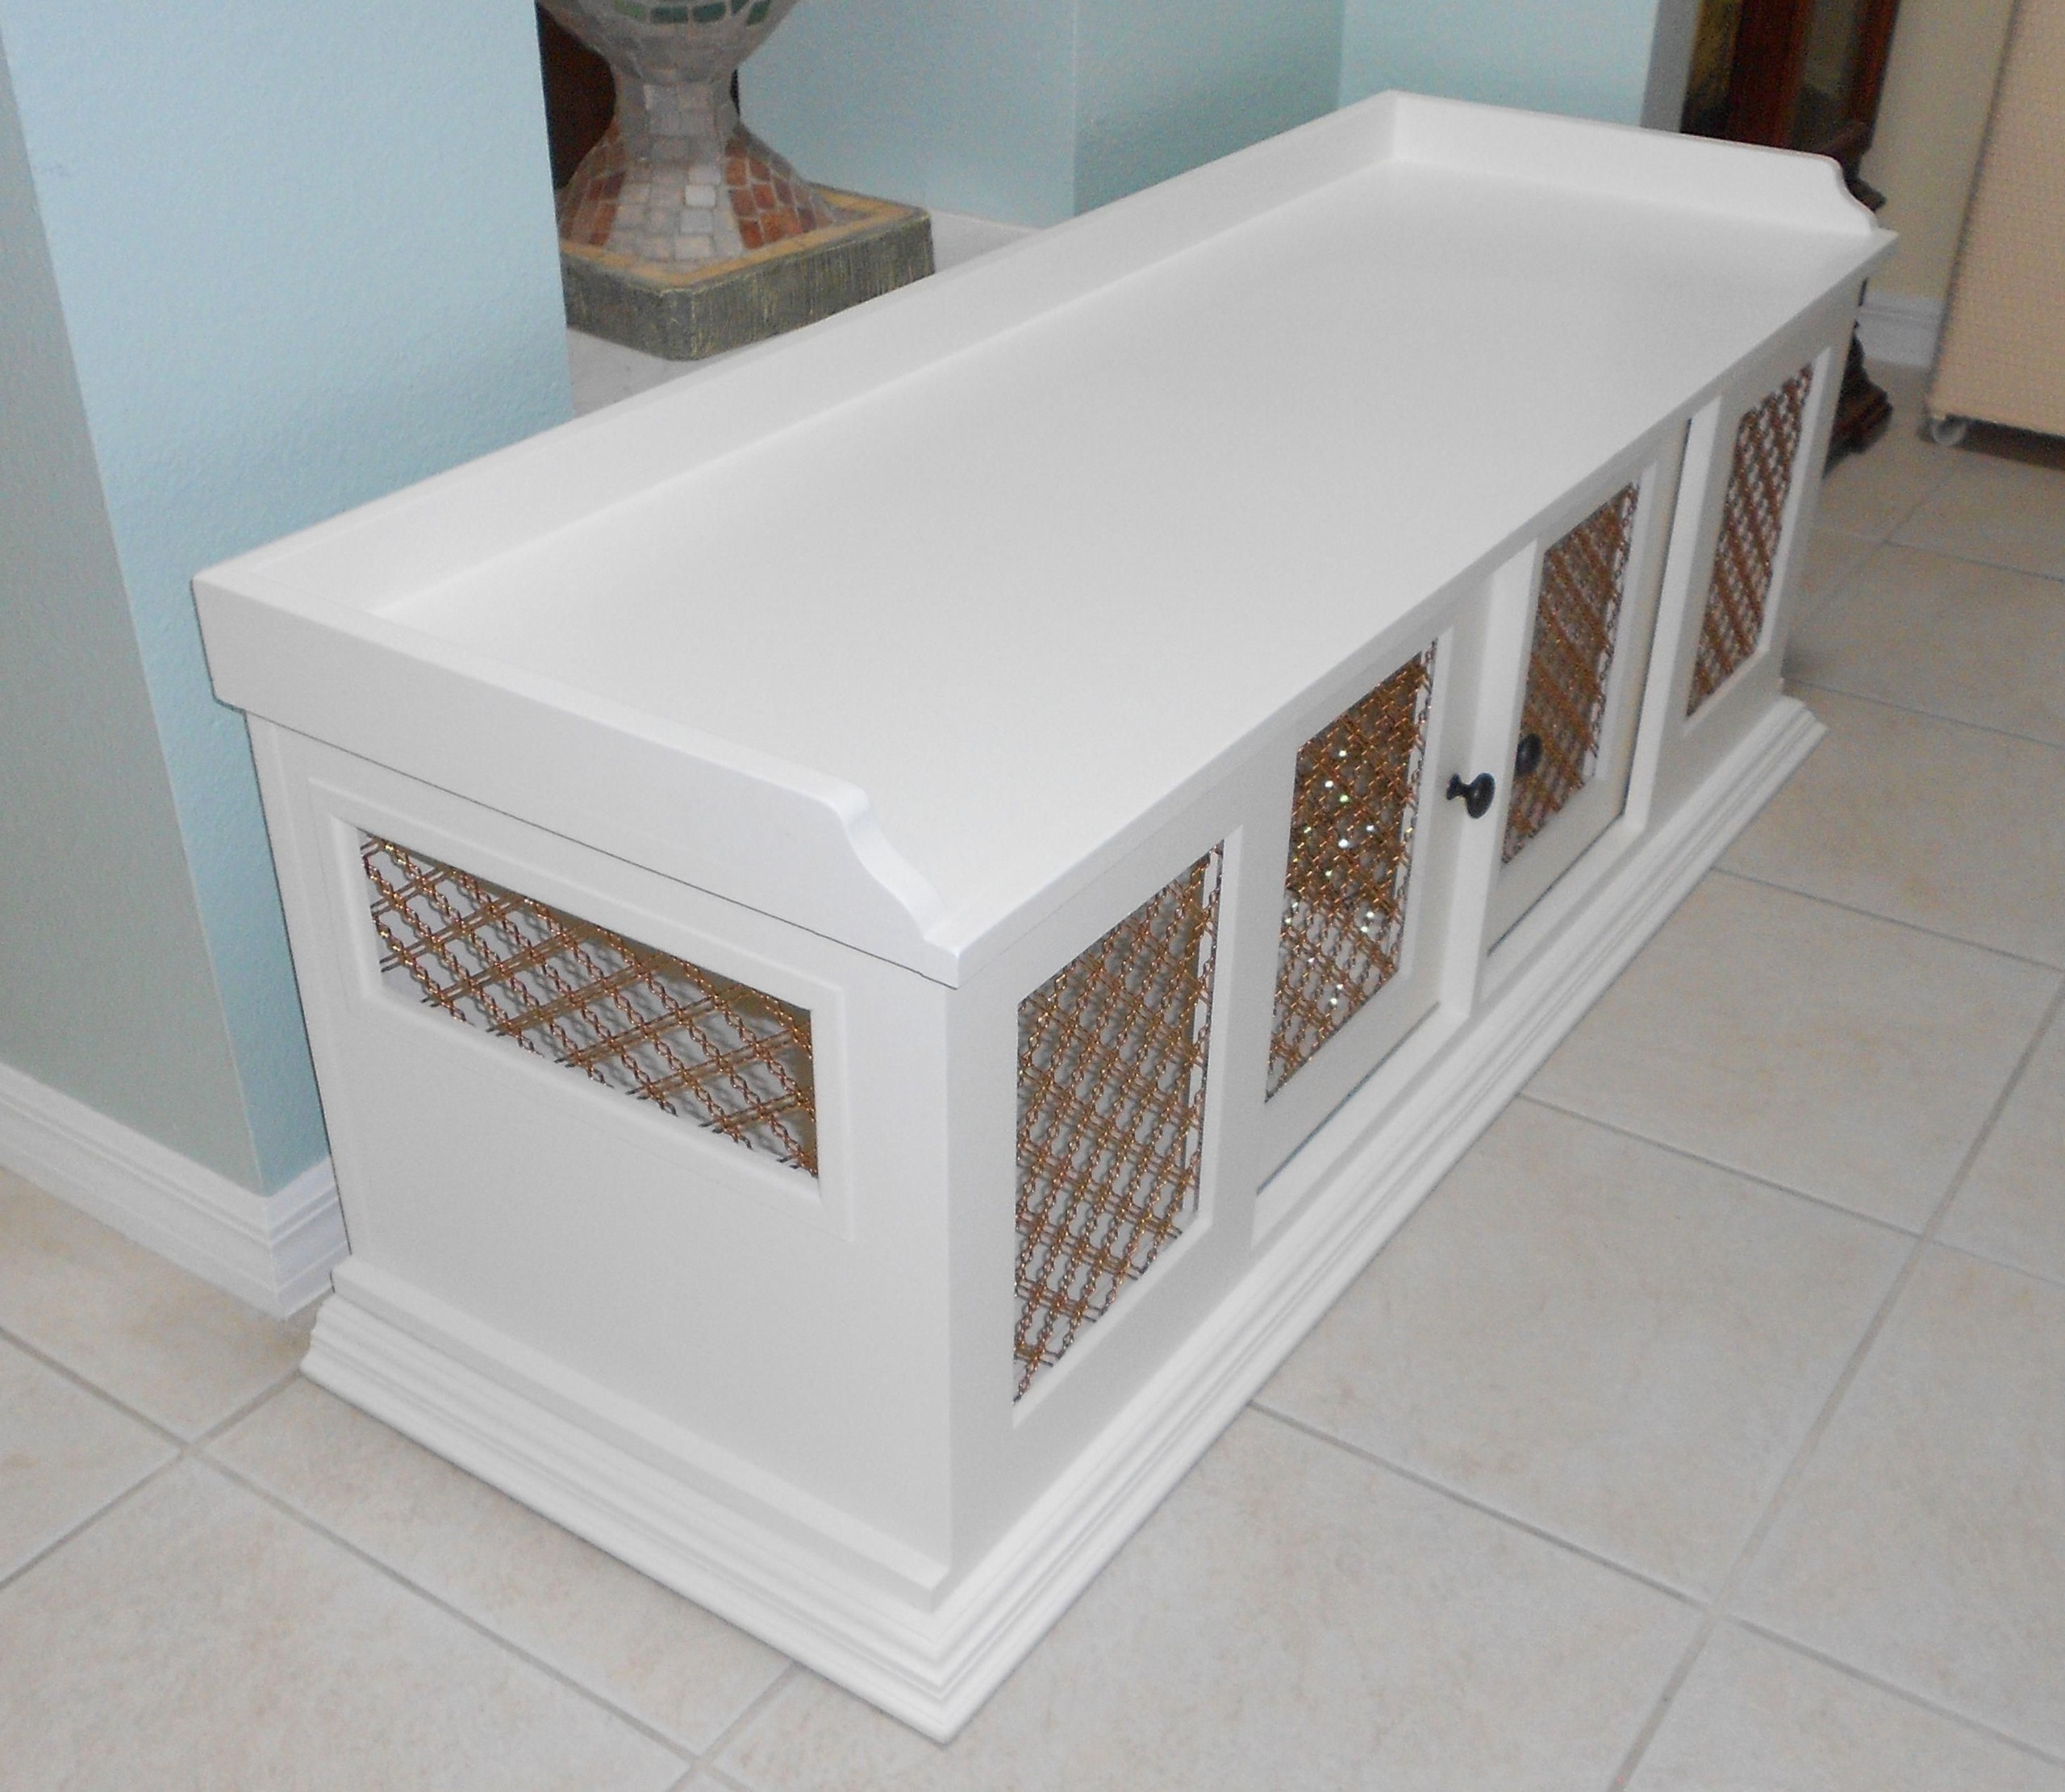 End table dog crate plans